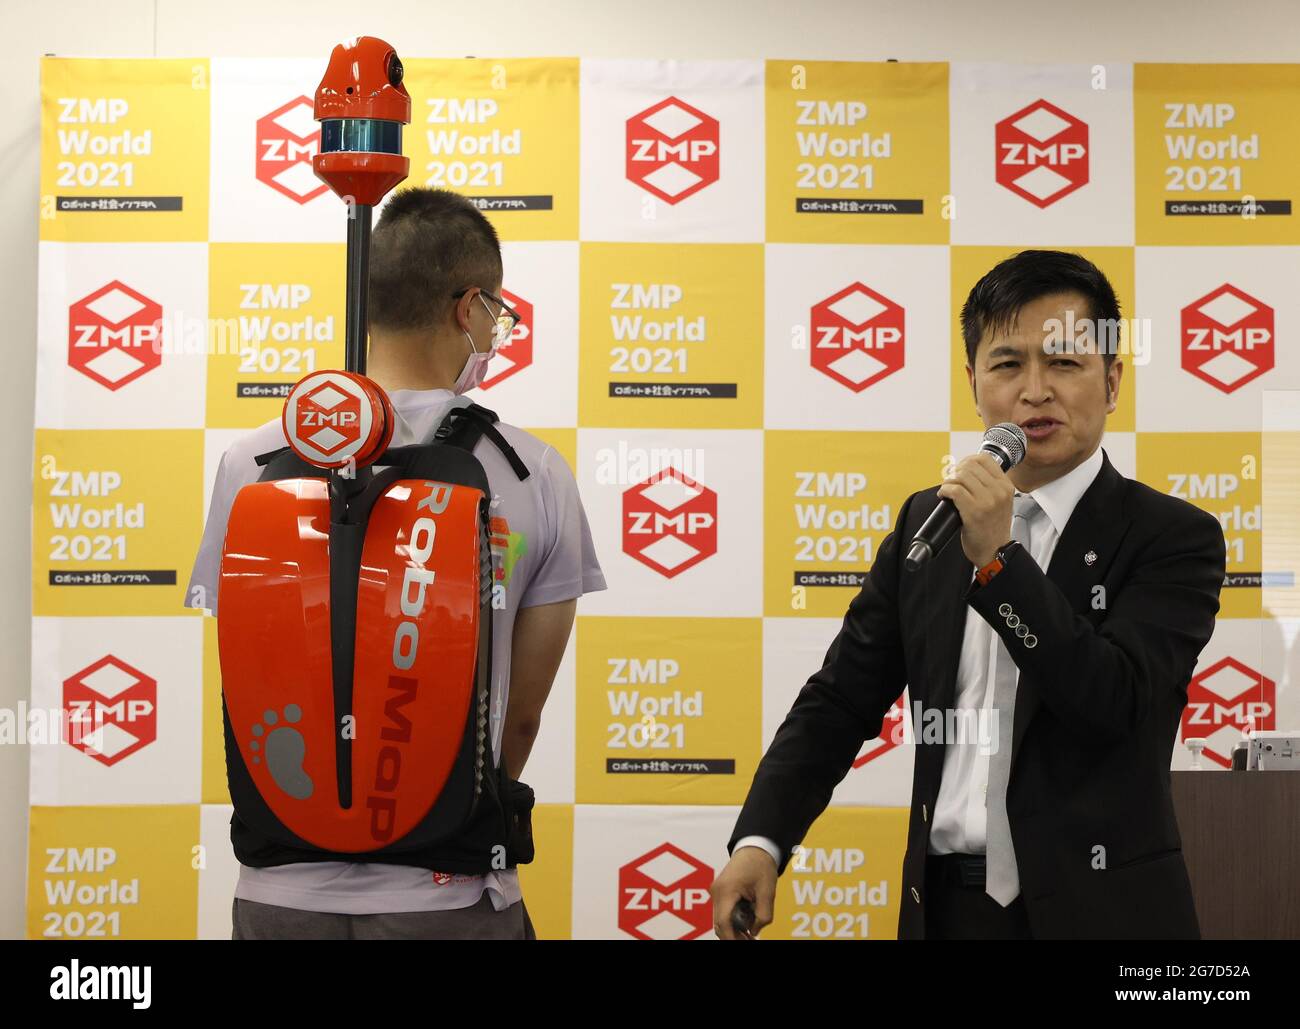 Tokyo, Japan. 13th July, 2021. Japan's robot venture ZMP employee displays  the portable mapping device RoboMap, a lightweight backpack with sensors of  3DLiDARs, gyro sensors and a camera to acquire 3D mapping